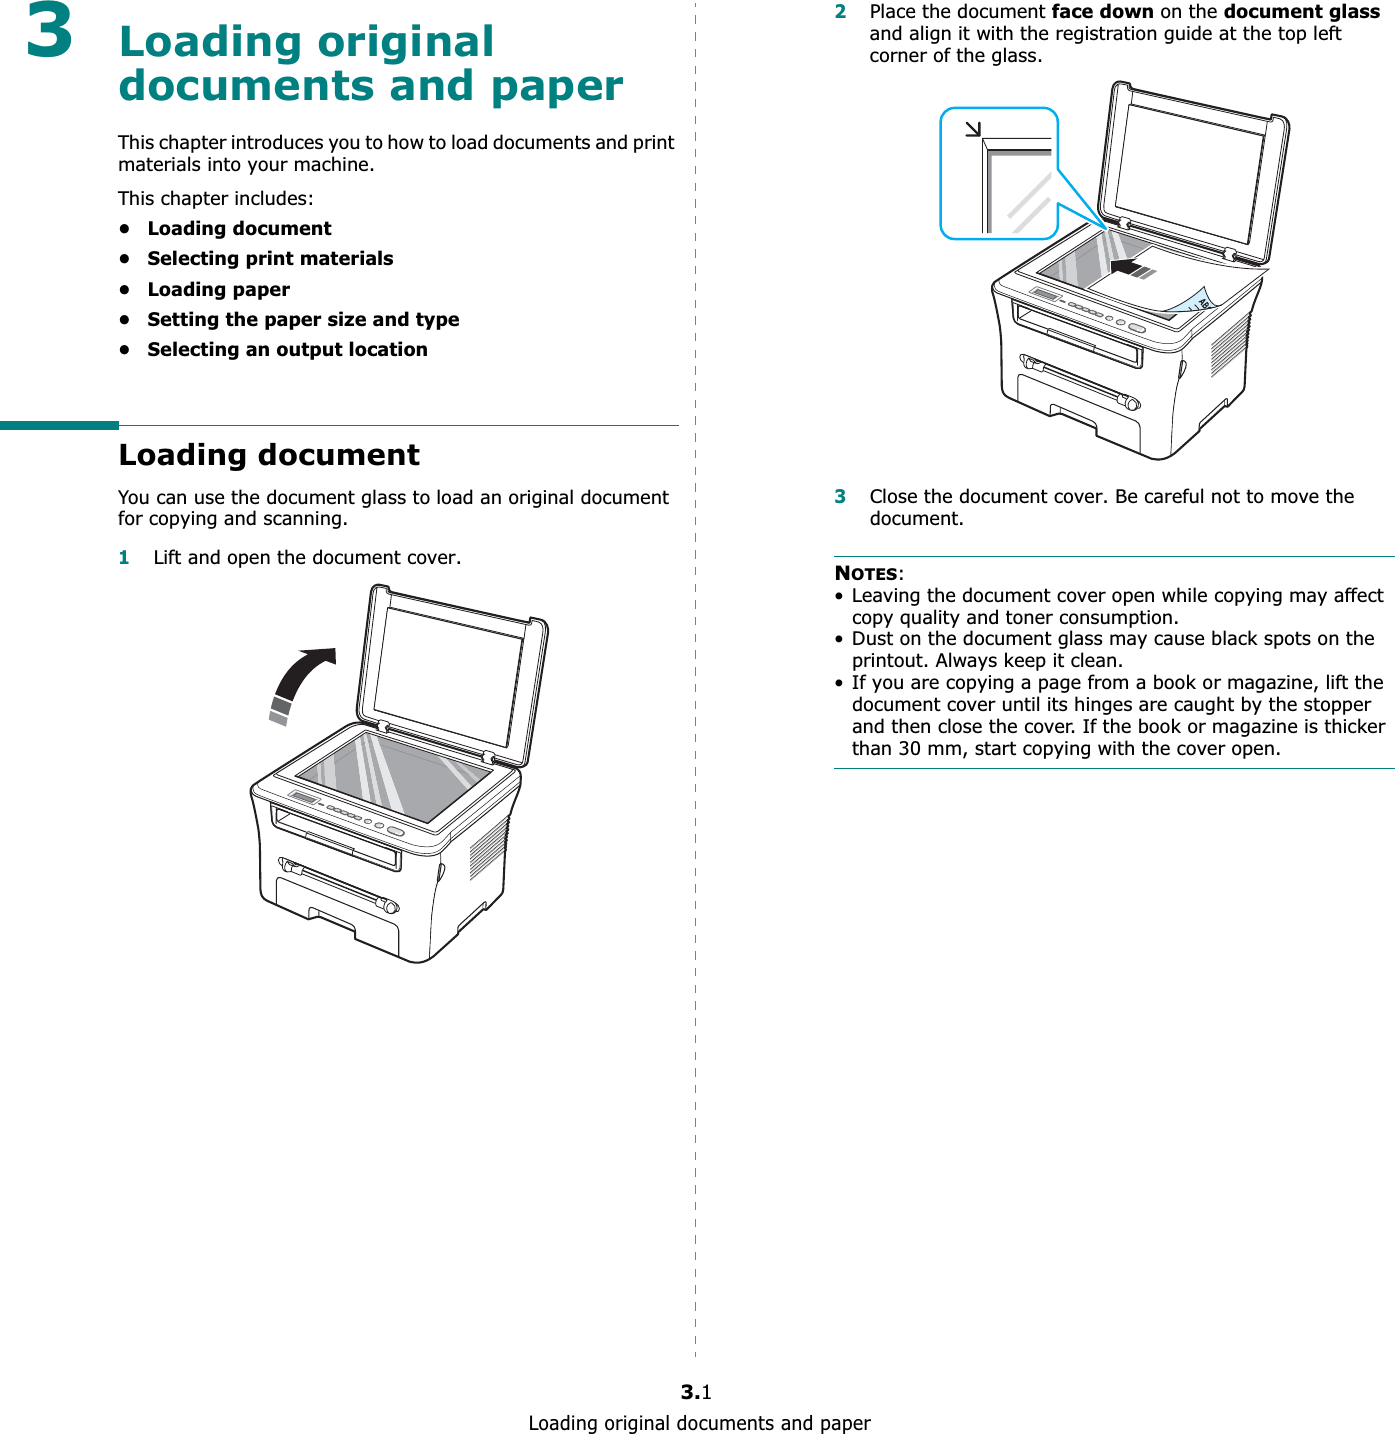 Loading original documents and paper3.13Loading original documents and paperThis chapter introduces you to how to load documents and print materials into your machine.This chapter includes:• Loading document• Selecting print materials• Loading paper• Setting the paper size and type• Selecting an output locationLoading documentYou can use the document glass to load an original document for copying and scanning.1Lift and open the document cover.2Place the document face down on the document glassand align it with the registration guide at the top left corner of the glass.3Close the document cover. Be careful not to move the document.NOTES:• Leaving the document cover open while copying may affect copy quality and toner consumption.• Dust on the document glass may cause black spots on the printout. Always keep it clean.• If you are copying a page from a book or magazine, lift the document cover until its hinges are caught by the stopper and then close the cover. If the book or magazine is thicker than 30 mm, start copying with the cover open.